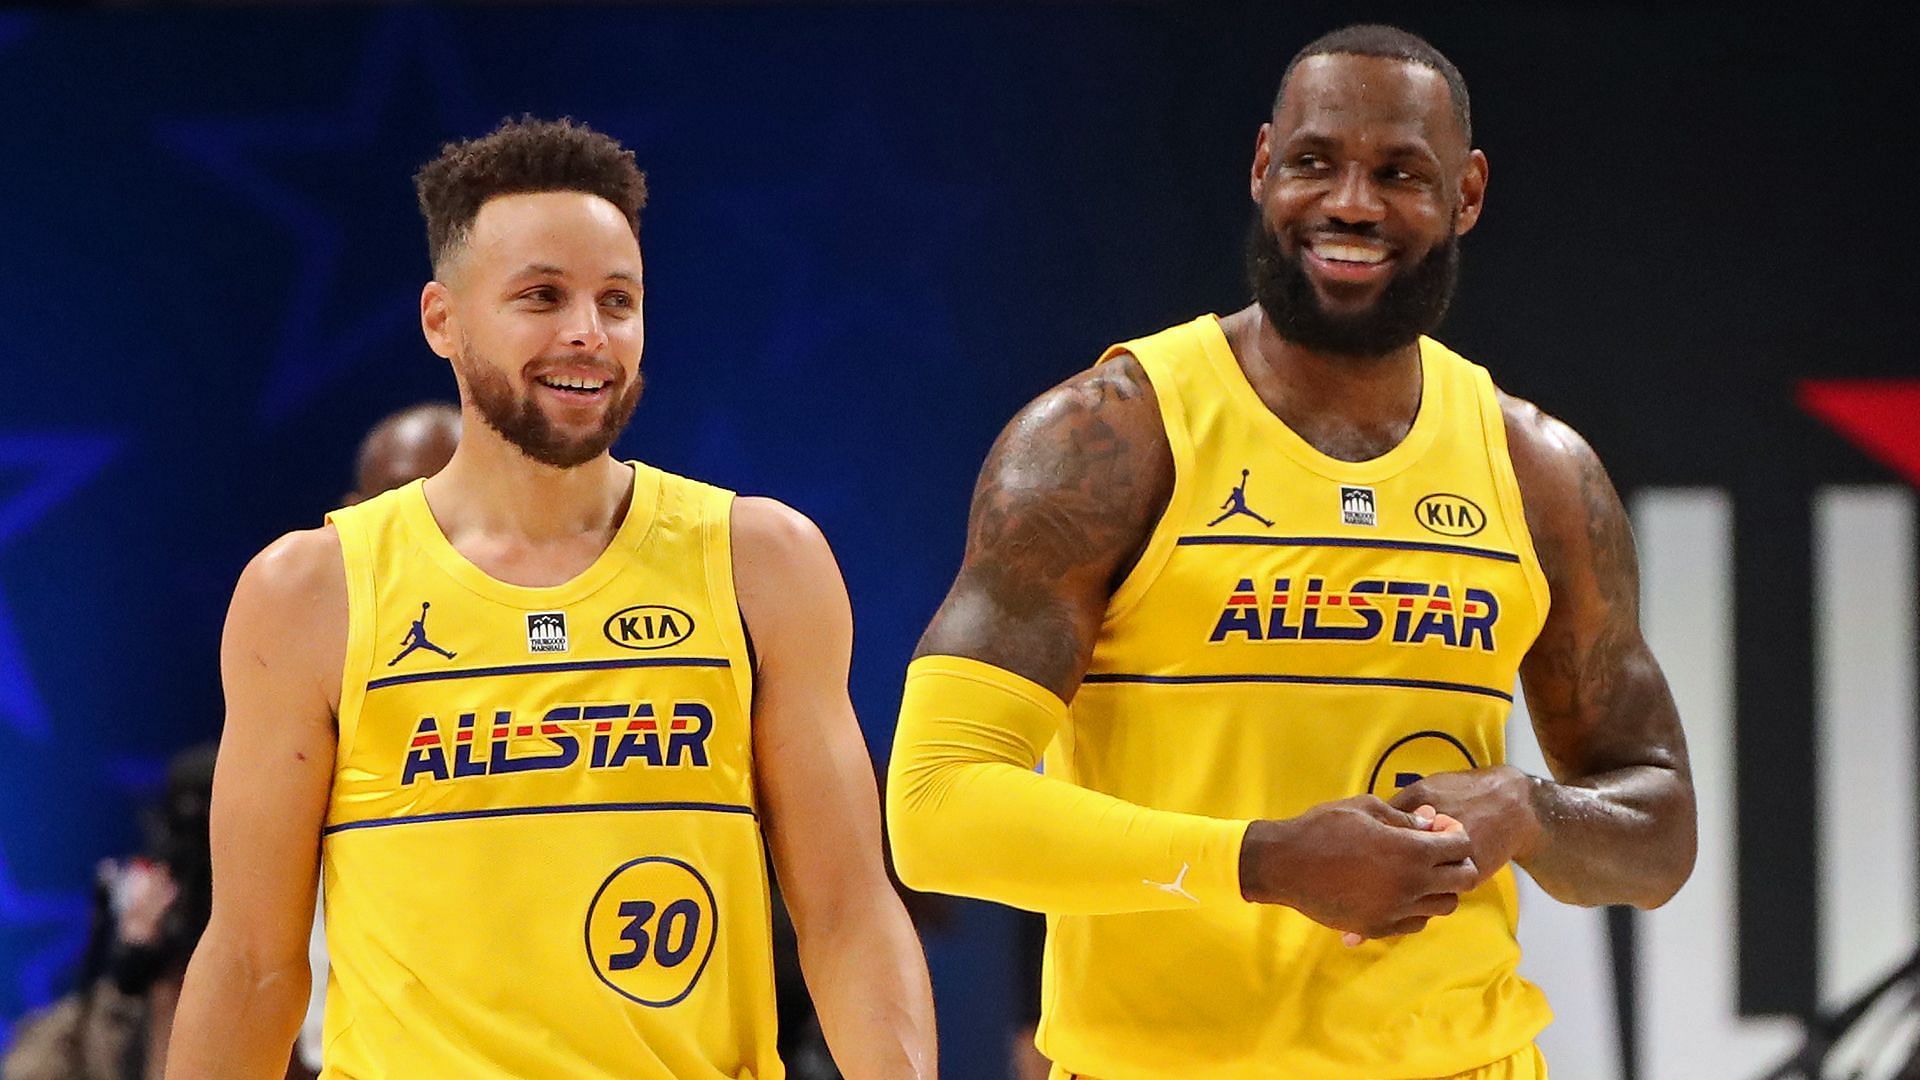 Steph Curry and LeBron James ruled the NBA